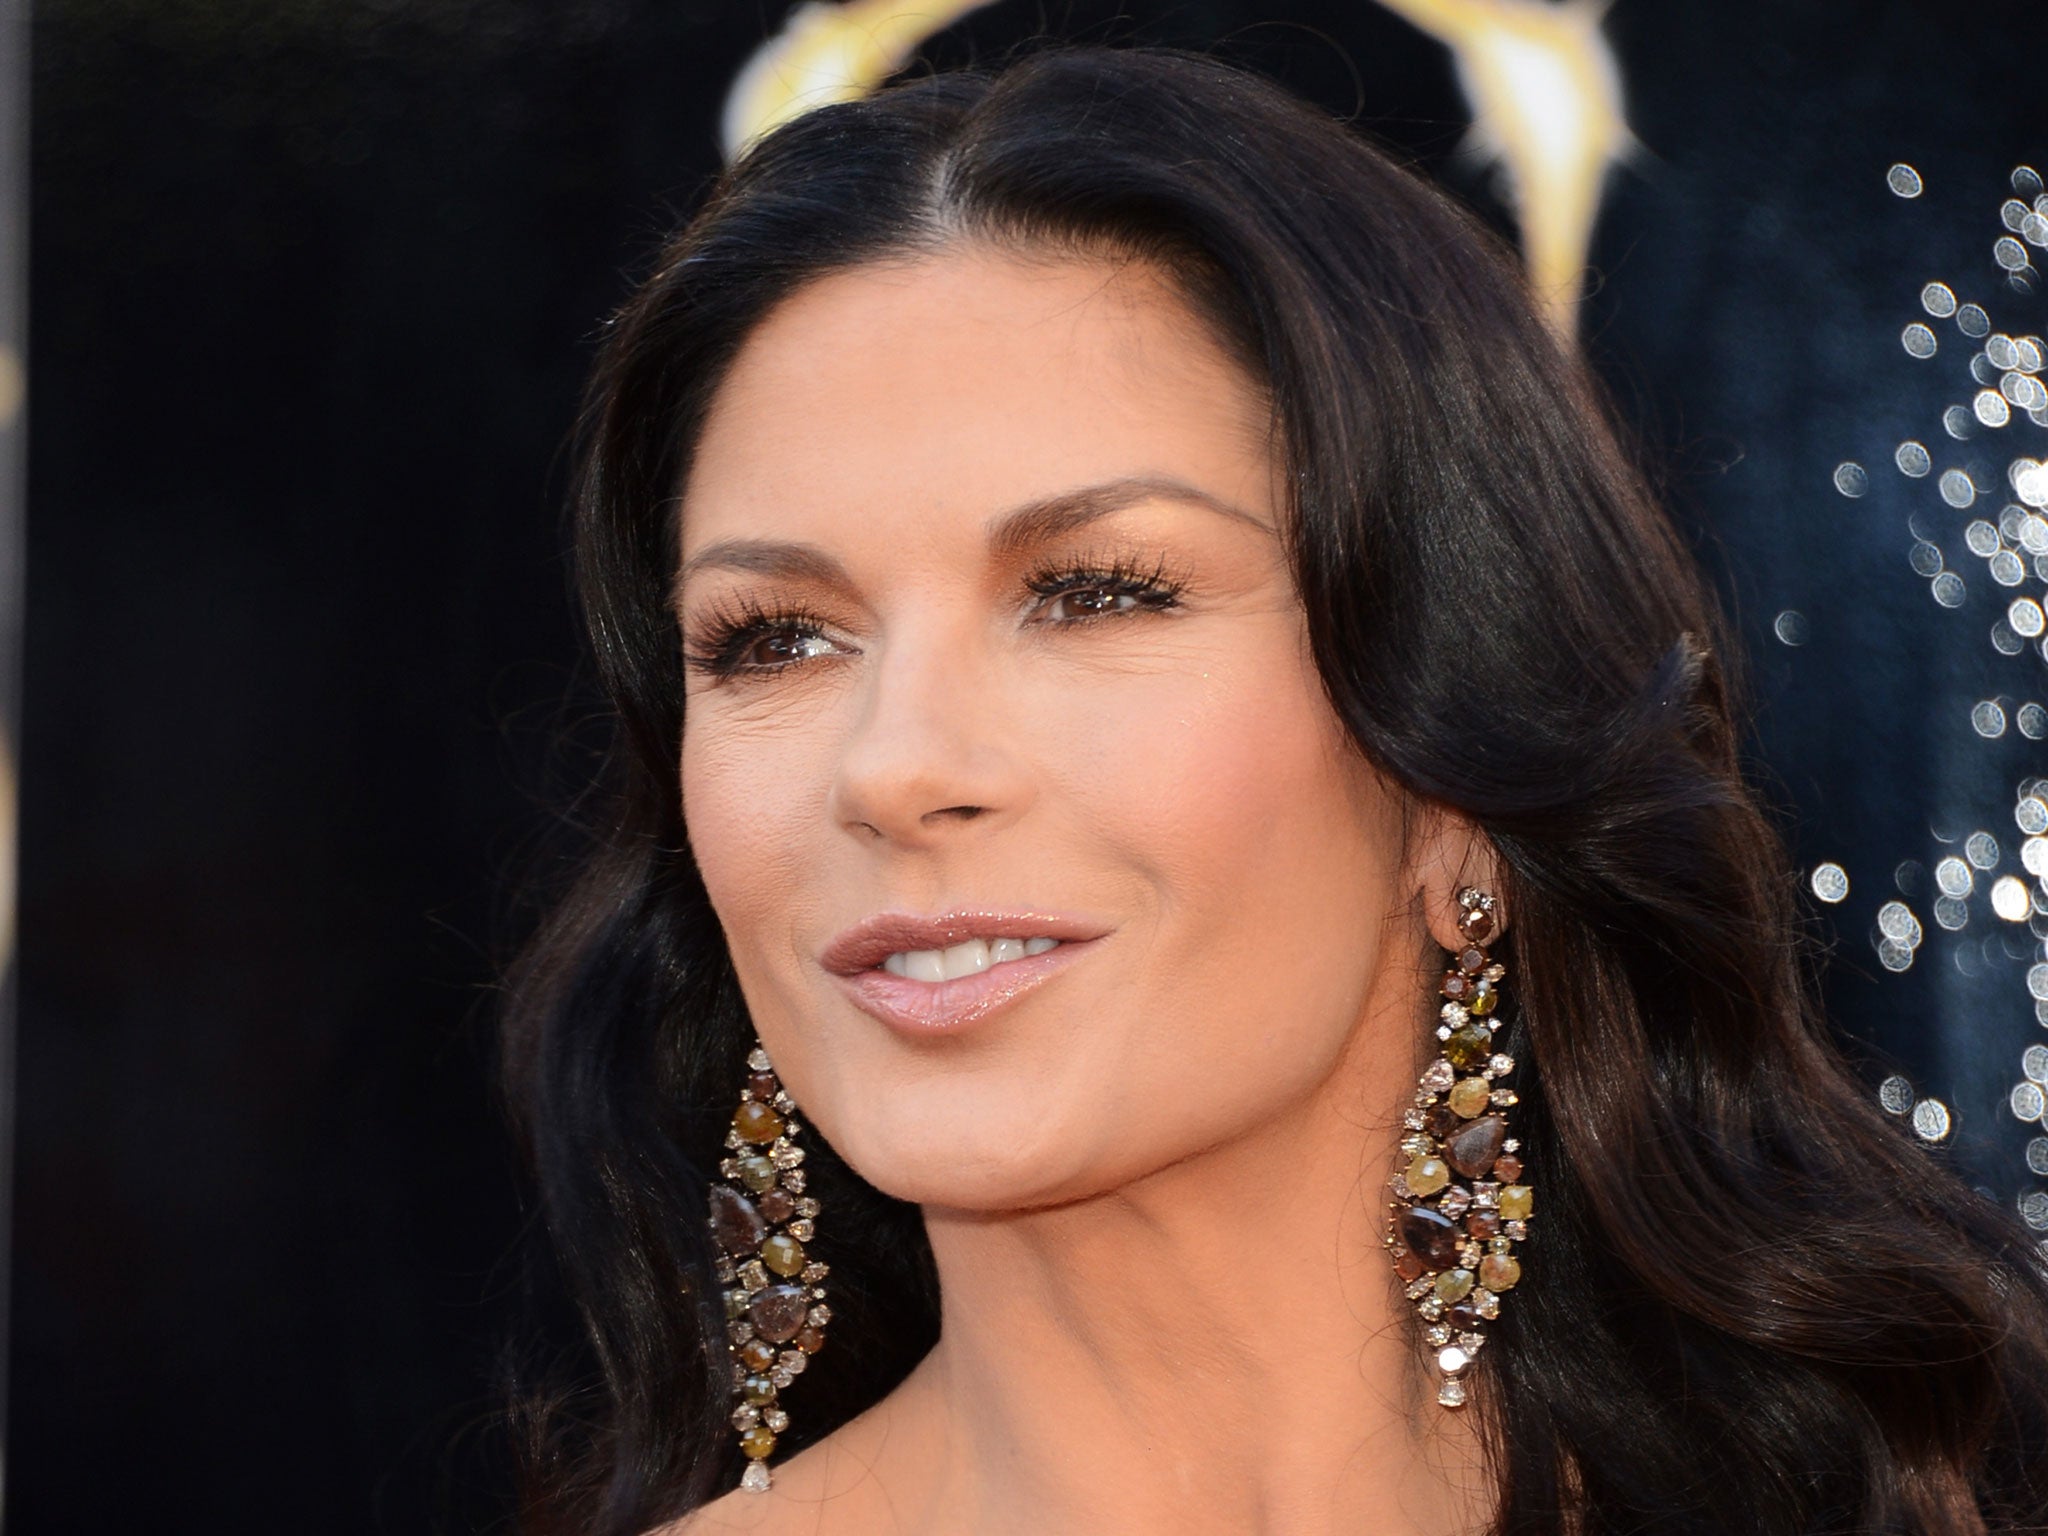 Catherine Zeta Jones will play a glamourous journalist in the film remake of Dad's Army